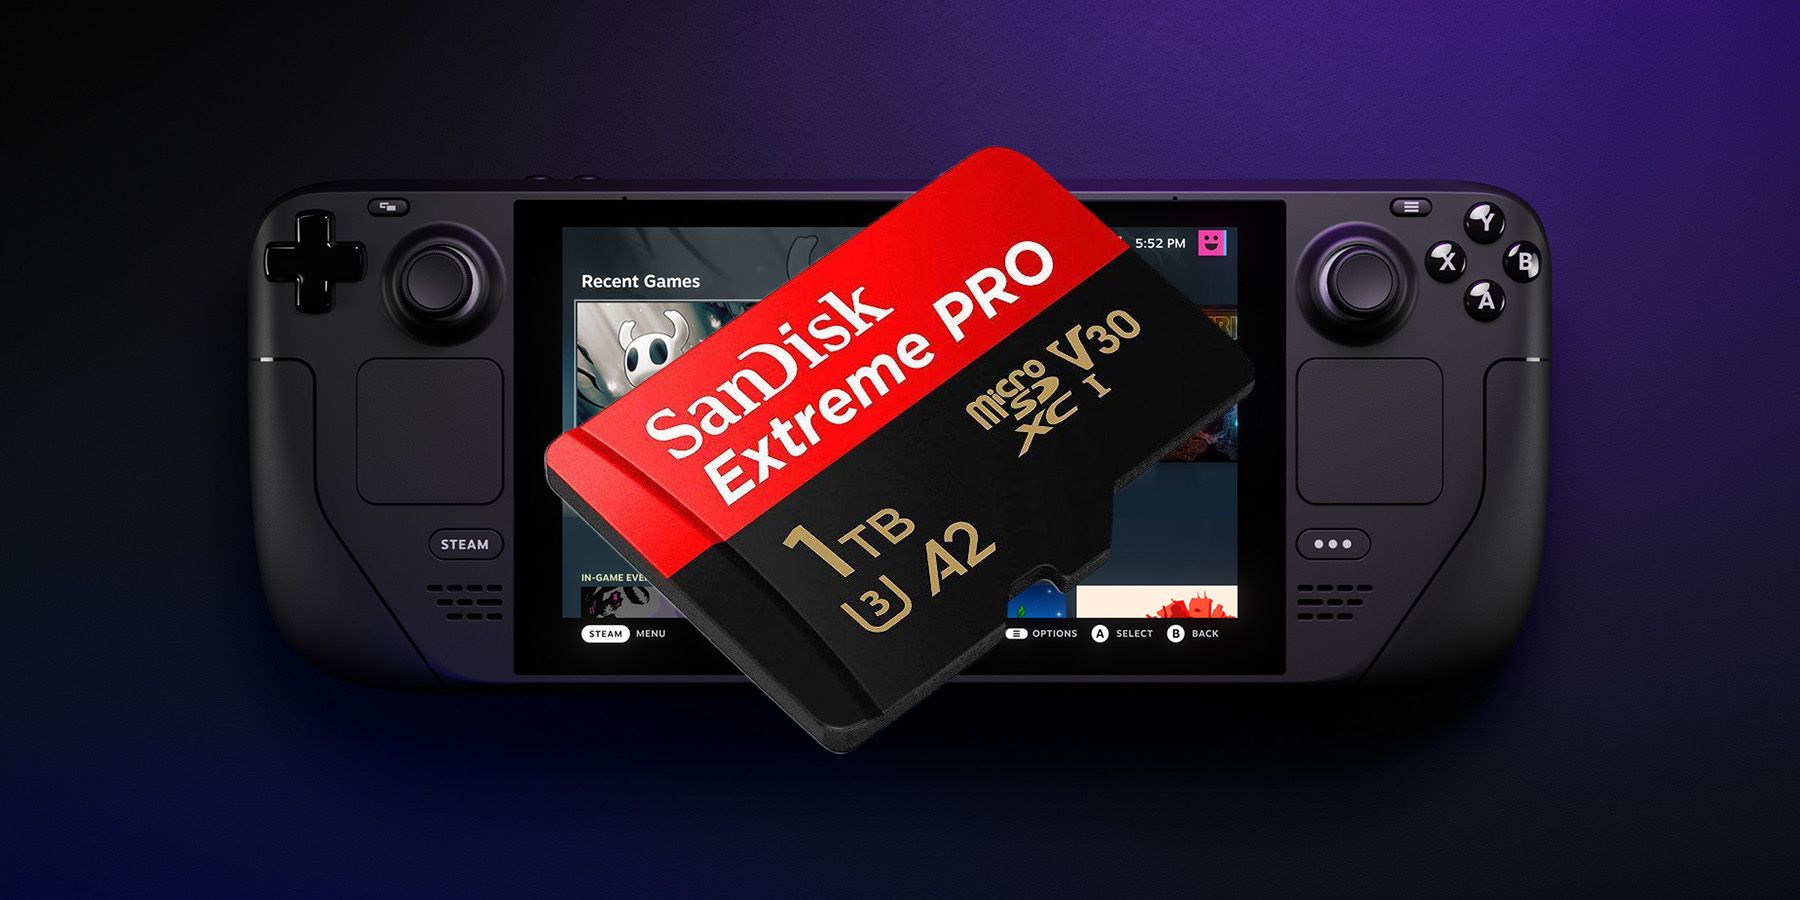 The SanDisk Extreme Pro Is an Excellent microSD Card for Steam Deck